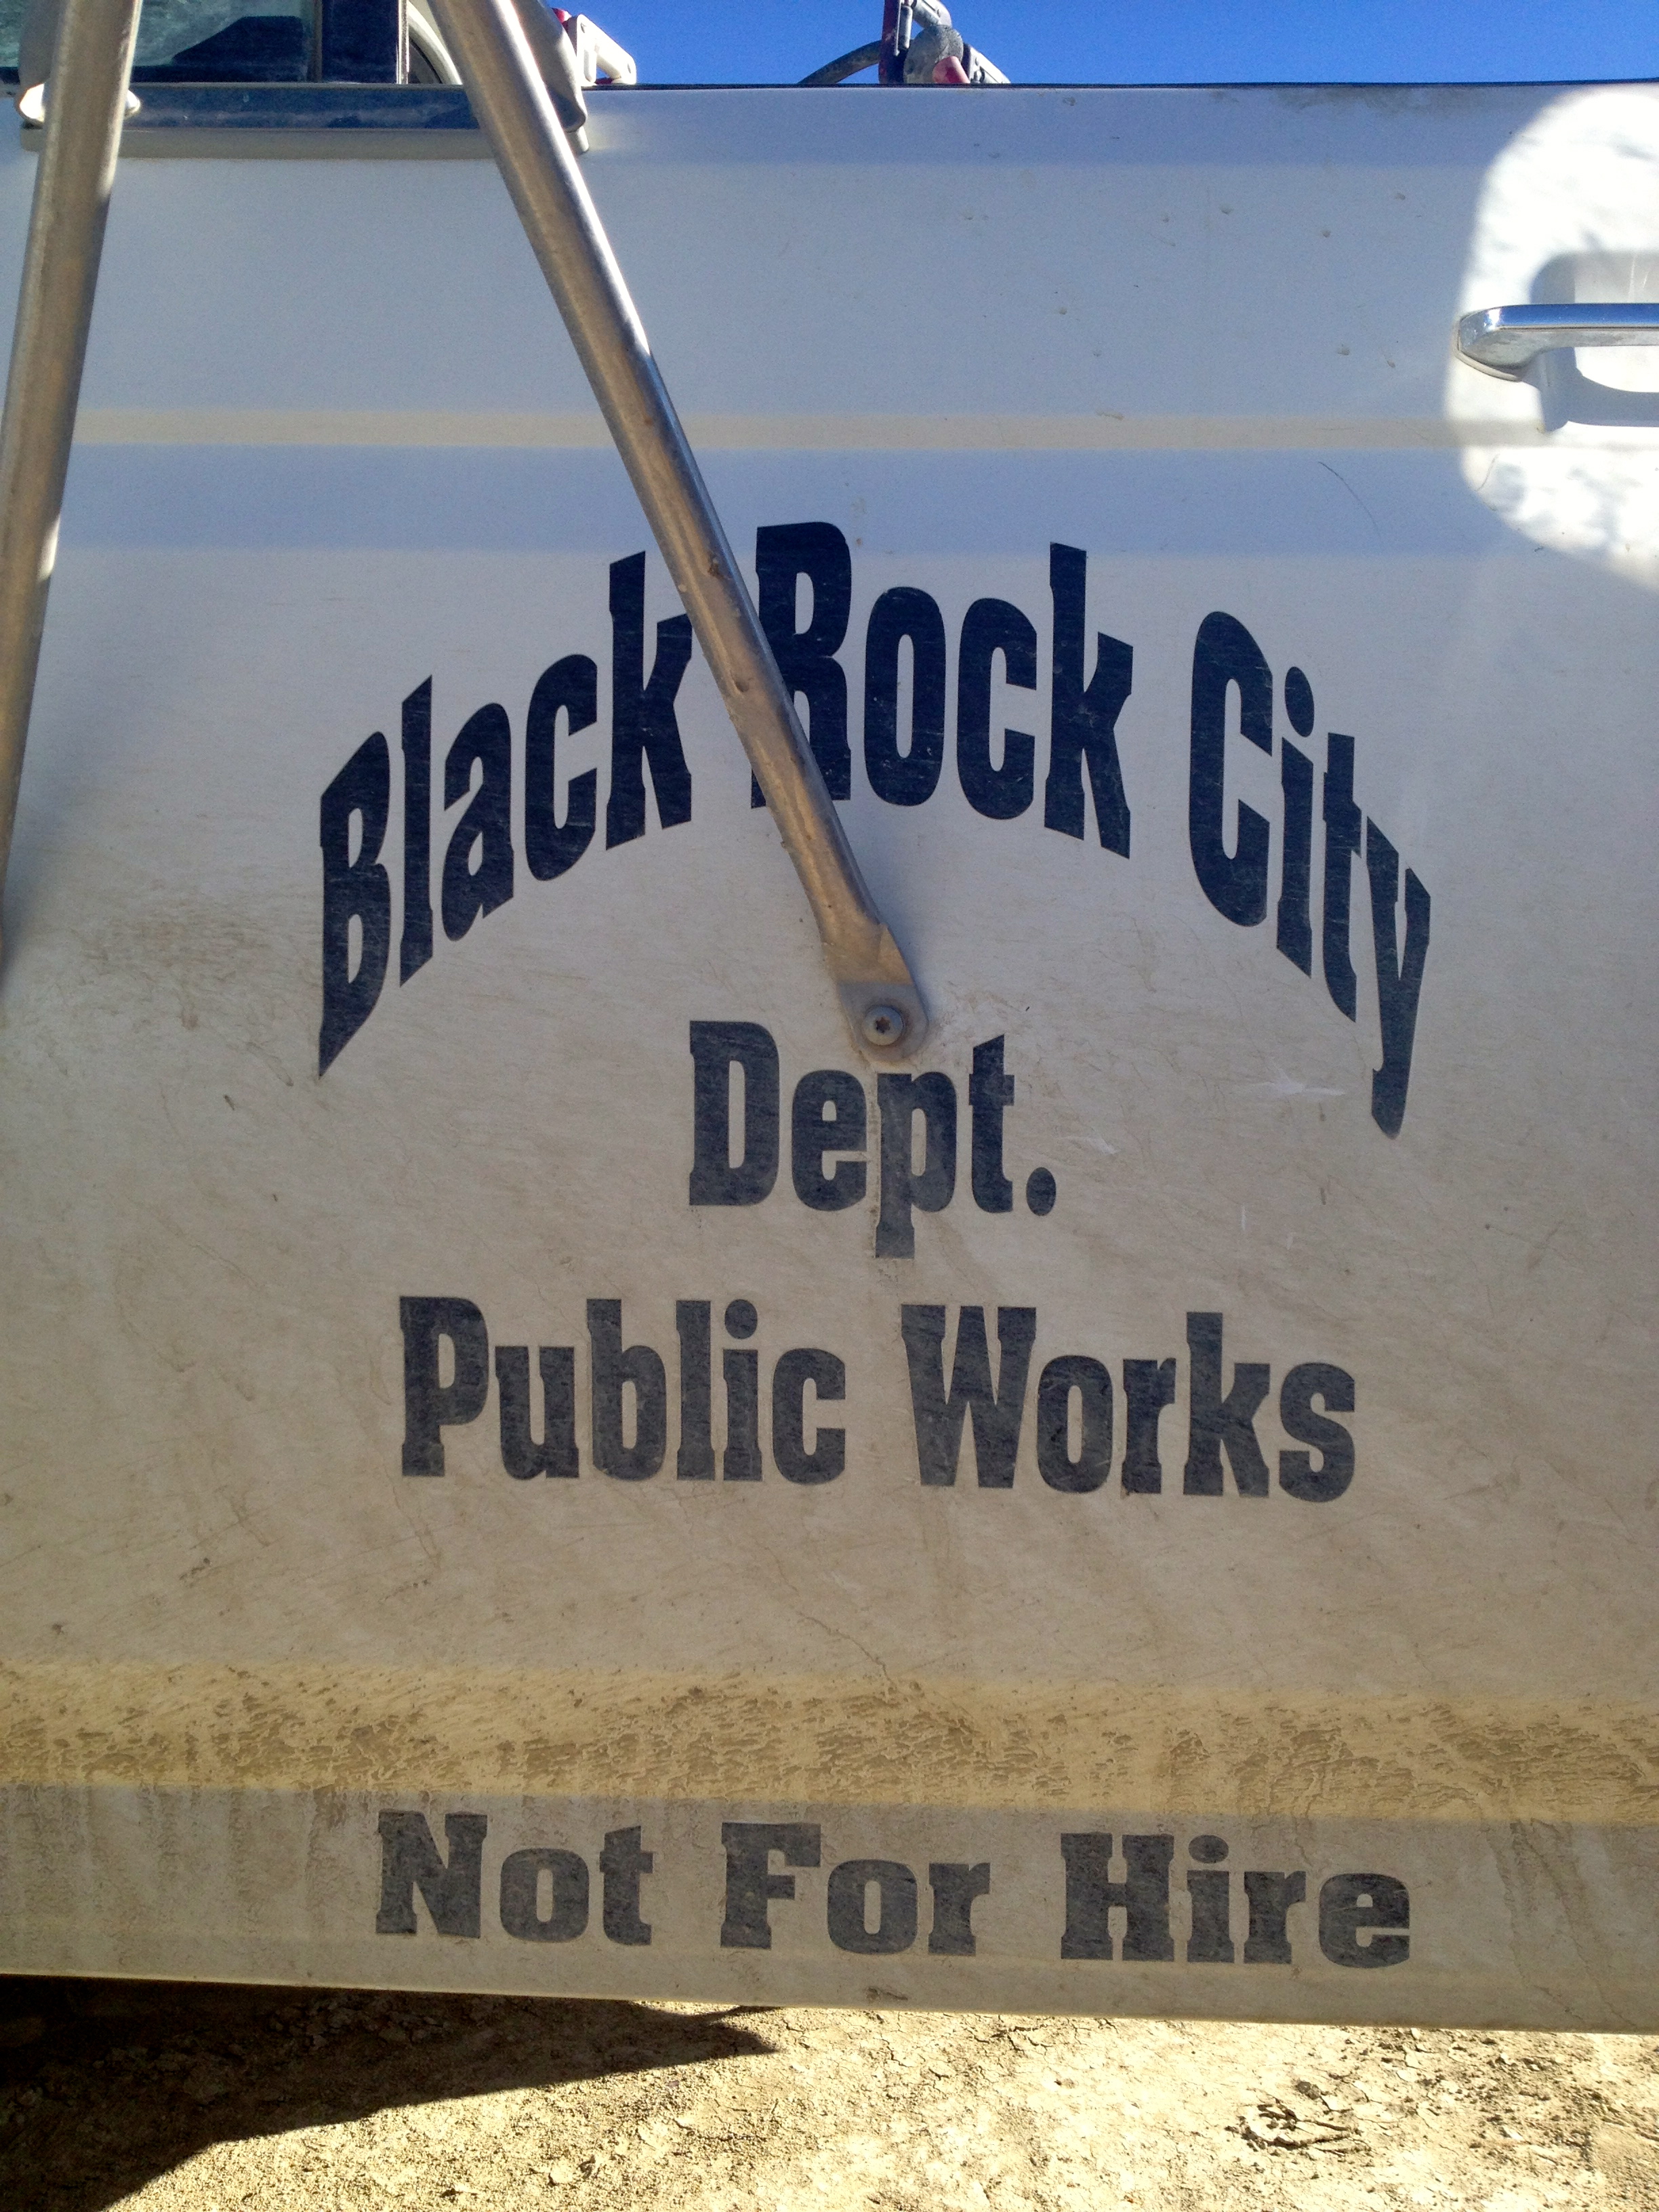 Black Rock City DPW auto shop works long hours to keep the fleet rolling